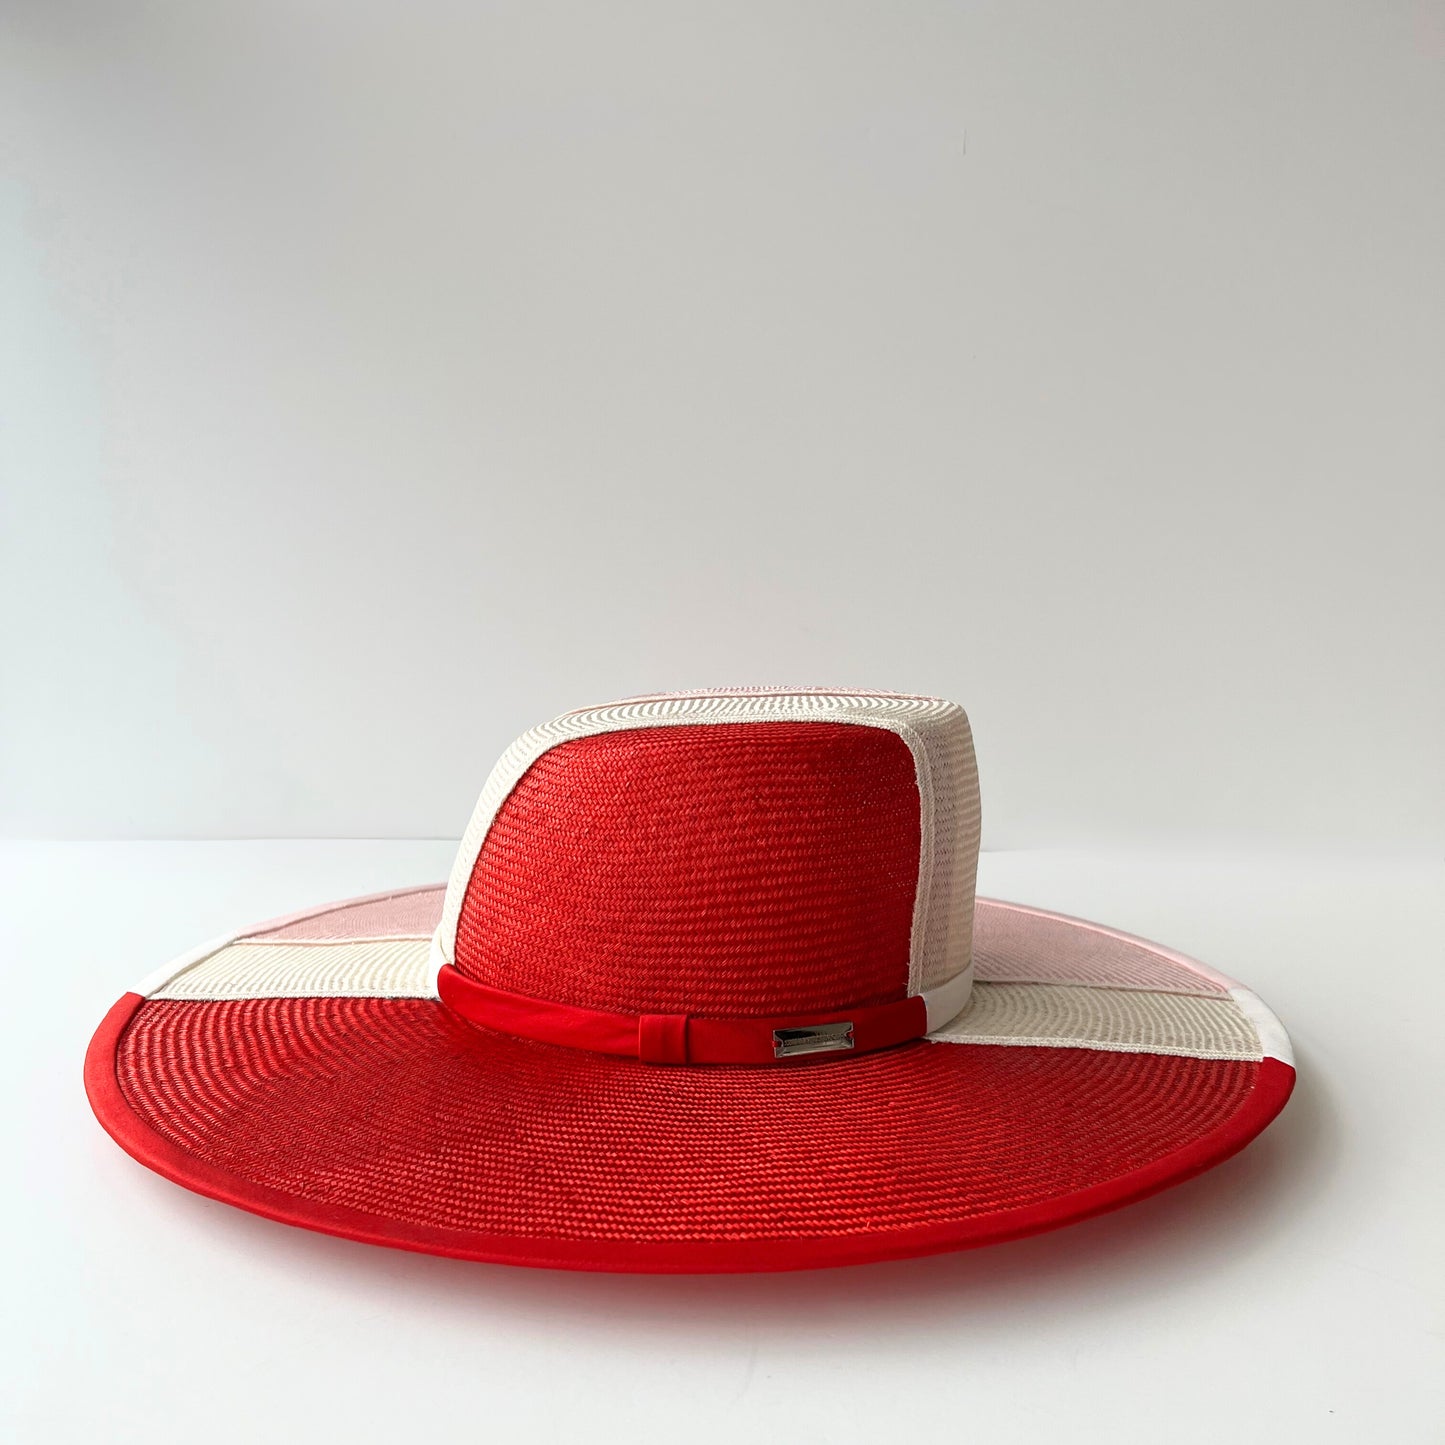 Williams Trio Hat: Red, pink and White